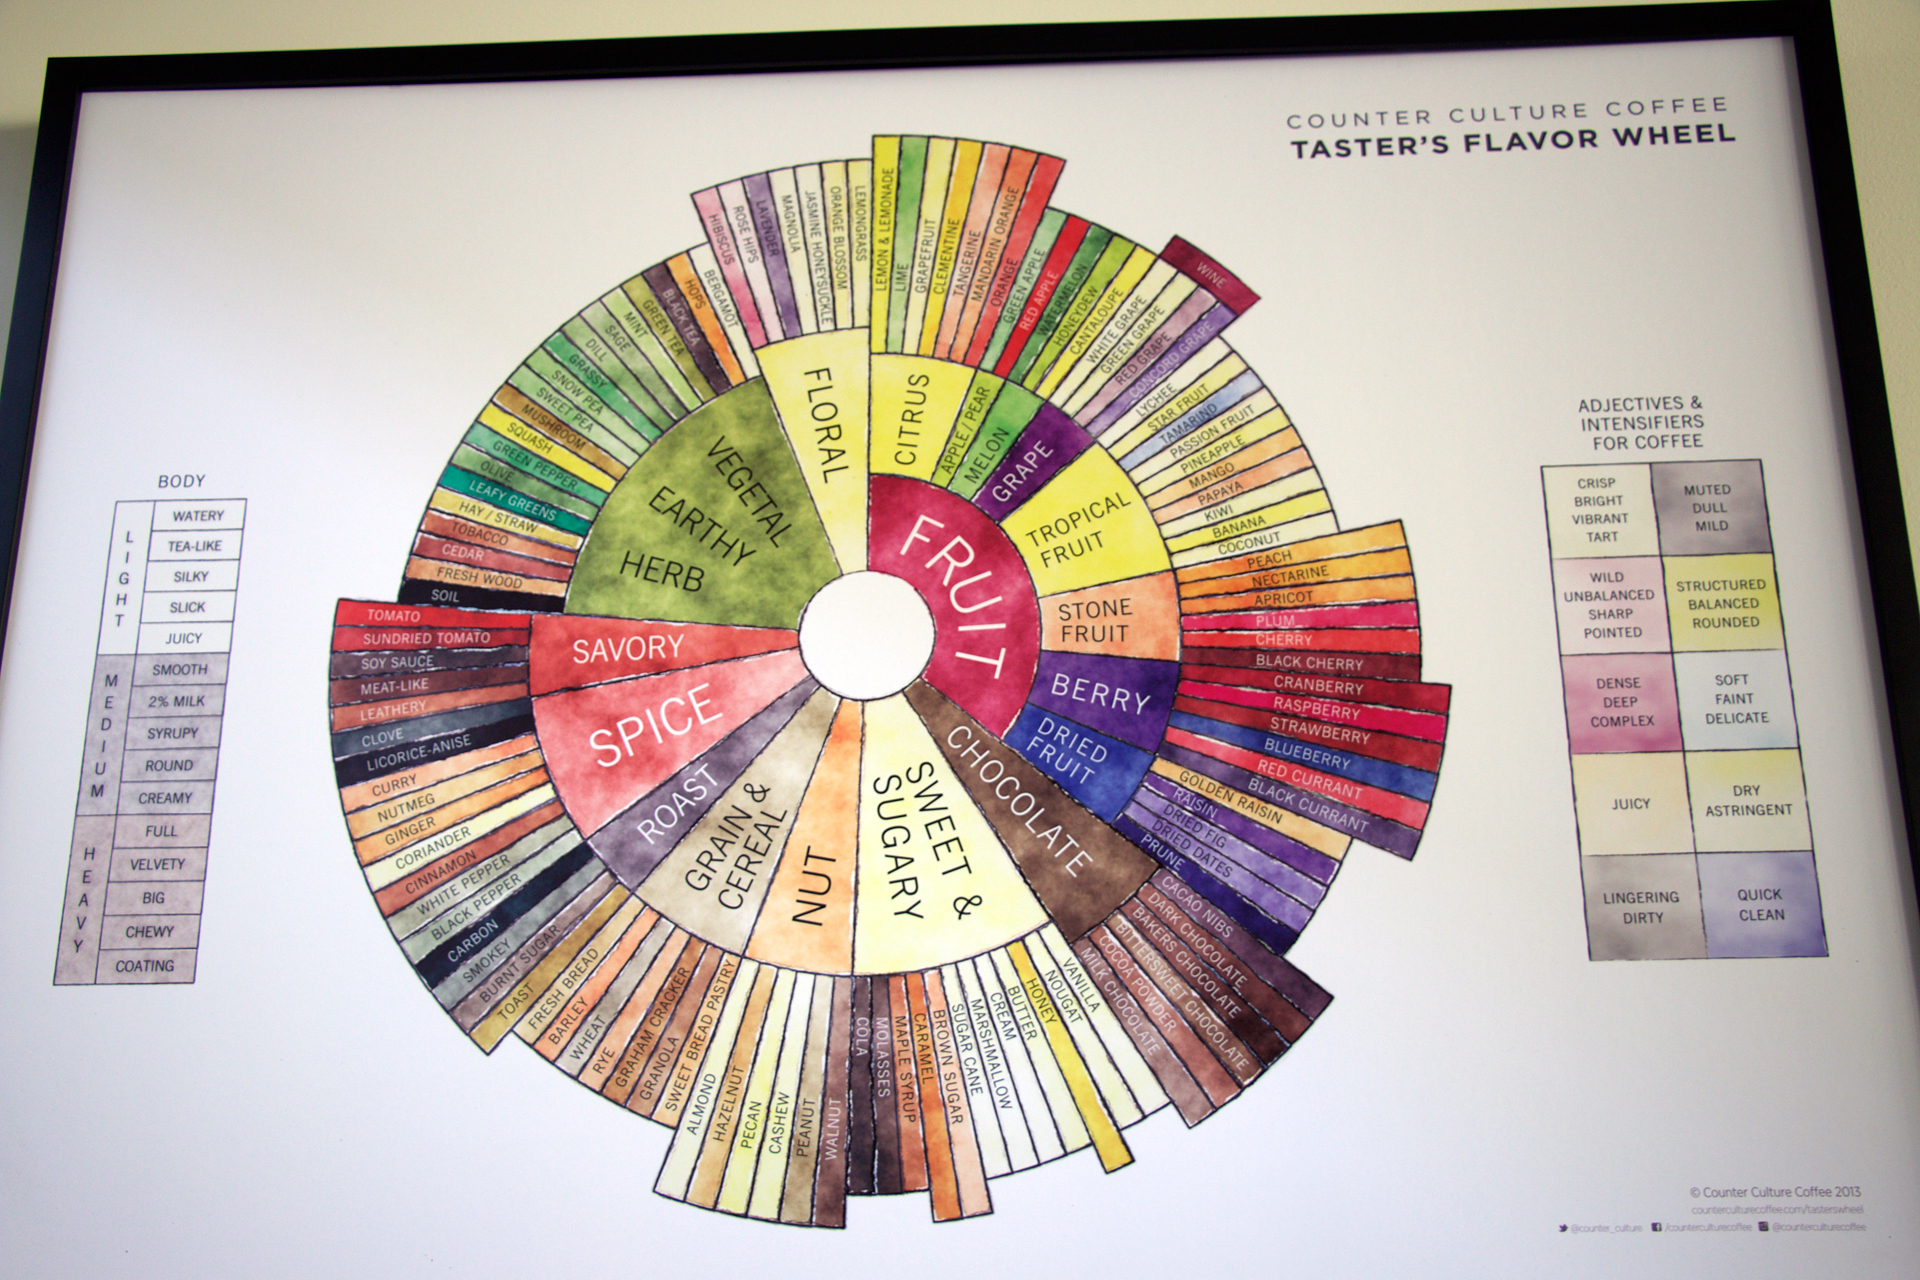 The taster’s flavor wheel, developed by Tim Hill, buyer and quality manager.